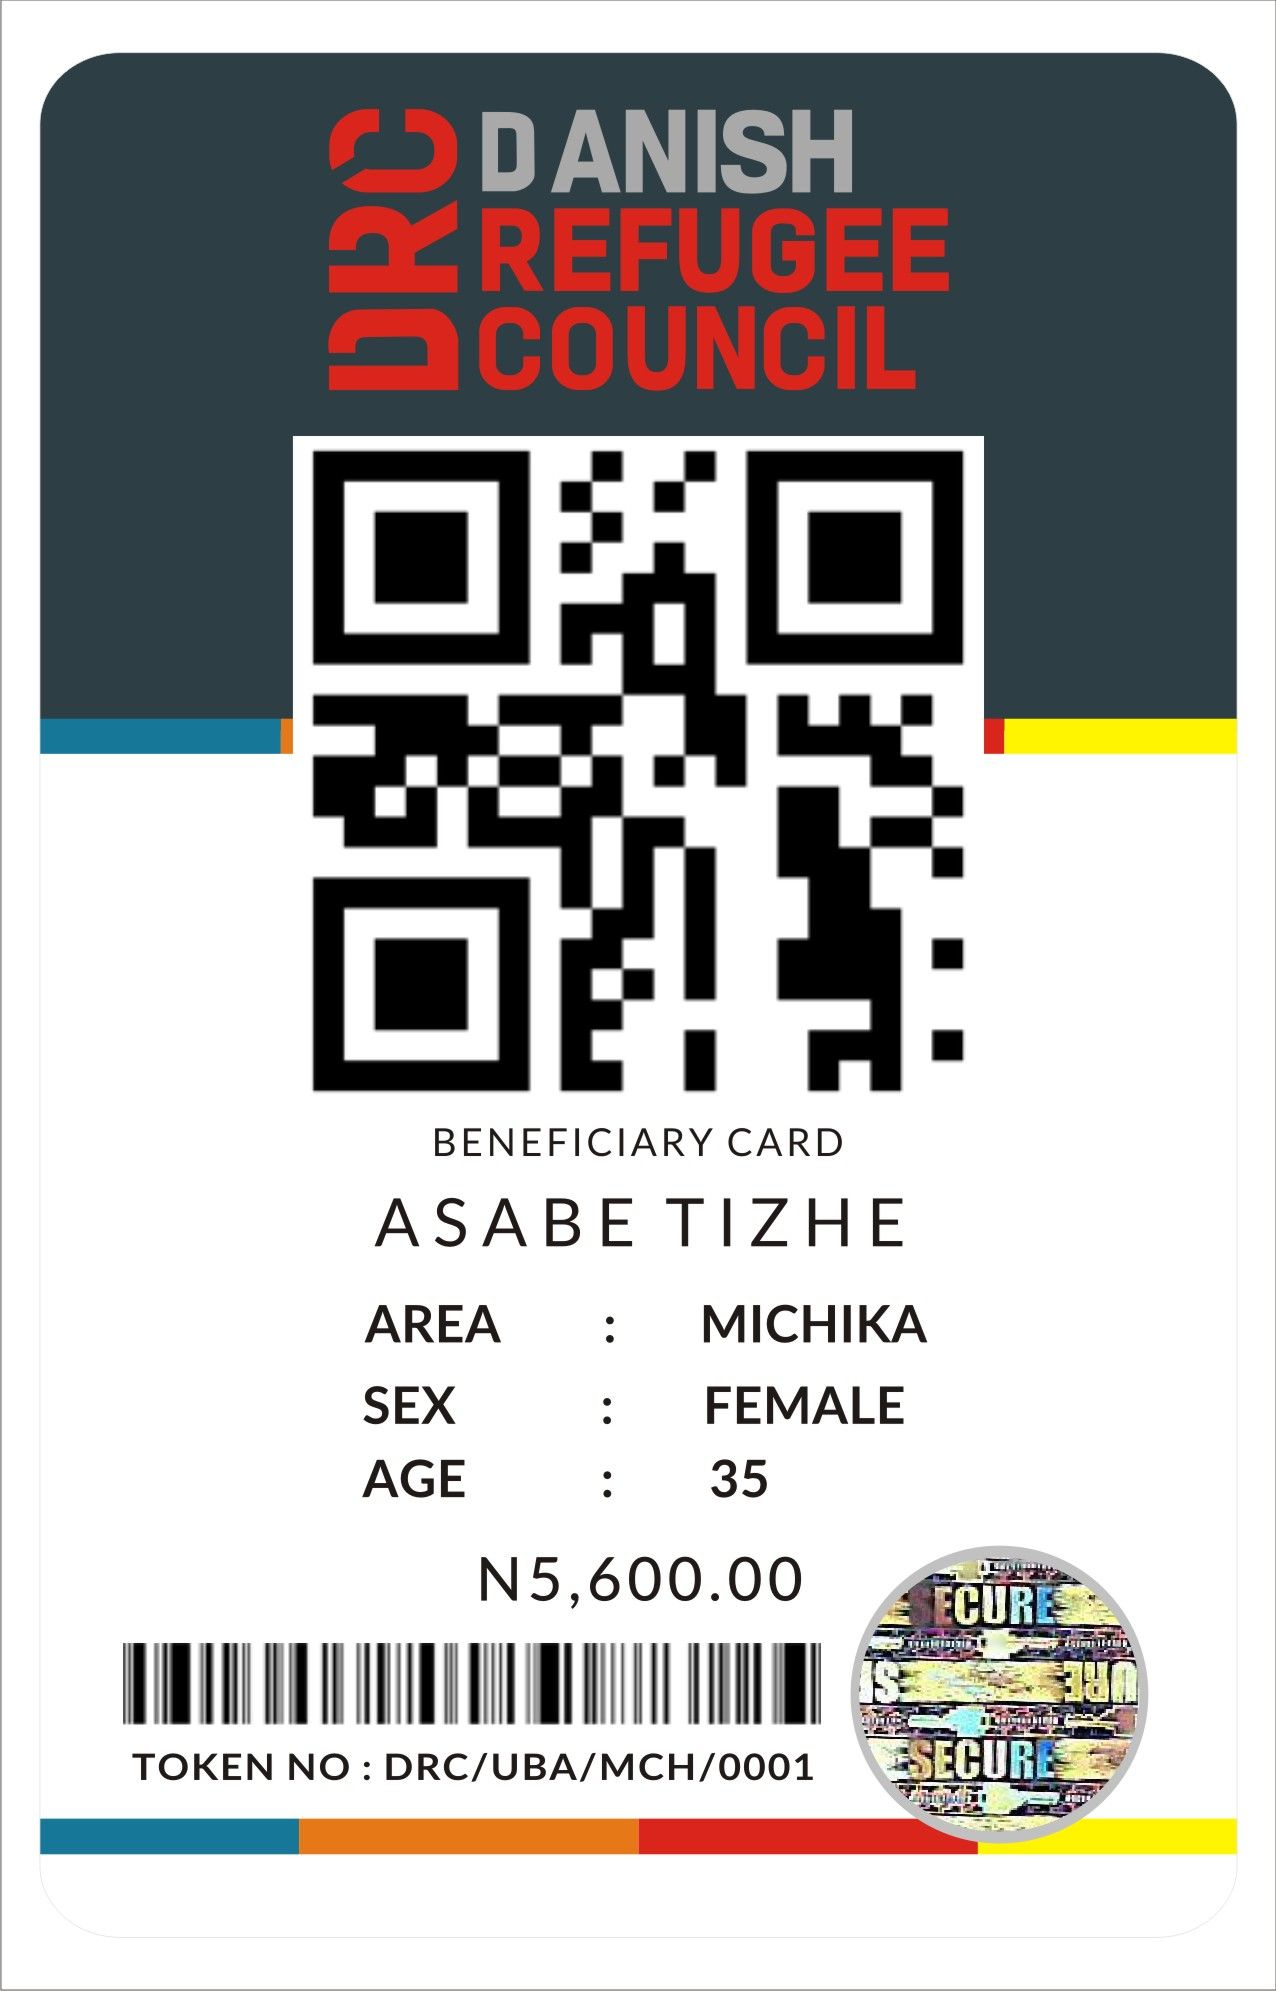 CALL CHINEDU ON 08179651585 TO PRINT QR CODE STICKERS, BAR CODE STICKERS AND HOLOGRAPHIC FOILS ON DOCUMENTS AND CERTIFICATES